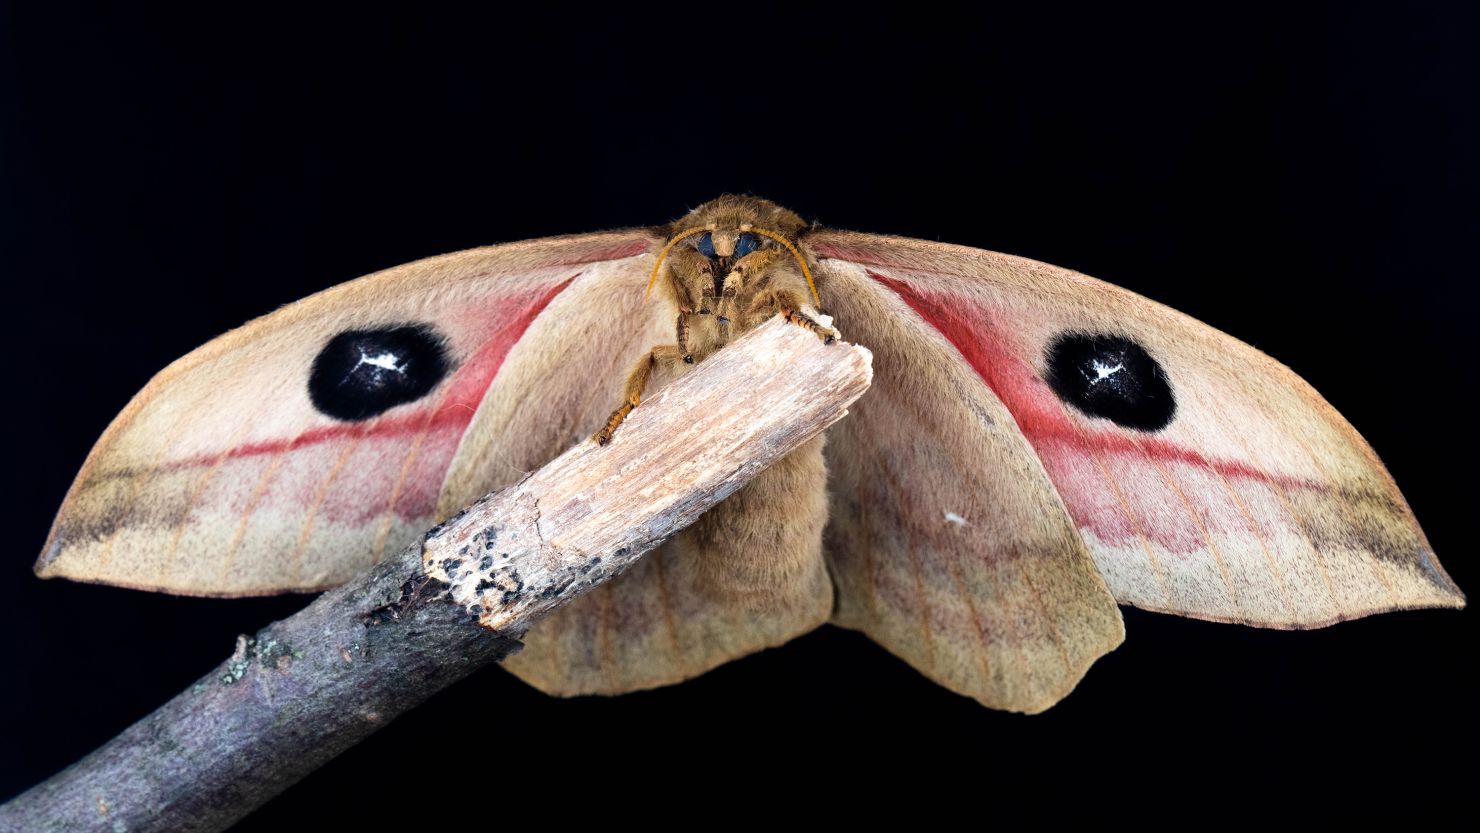 Moths don't know which way is up when around artificial light sources, a new study found. An automeris moth is shown.